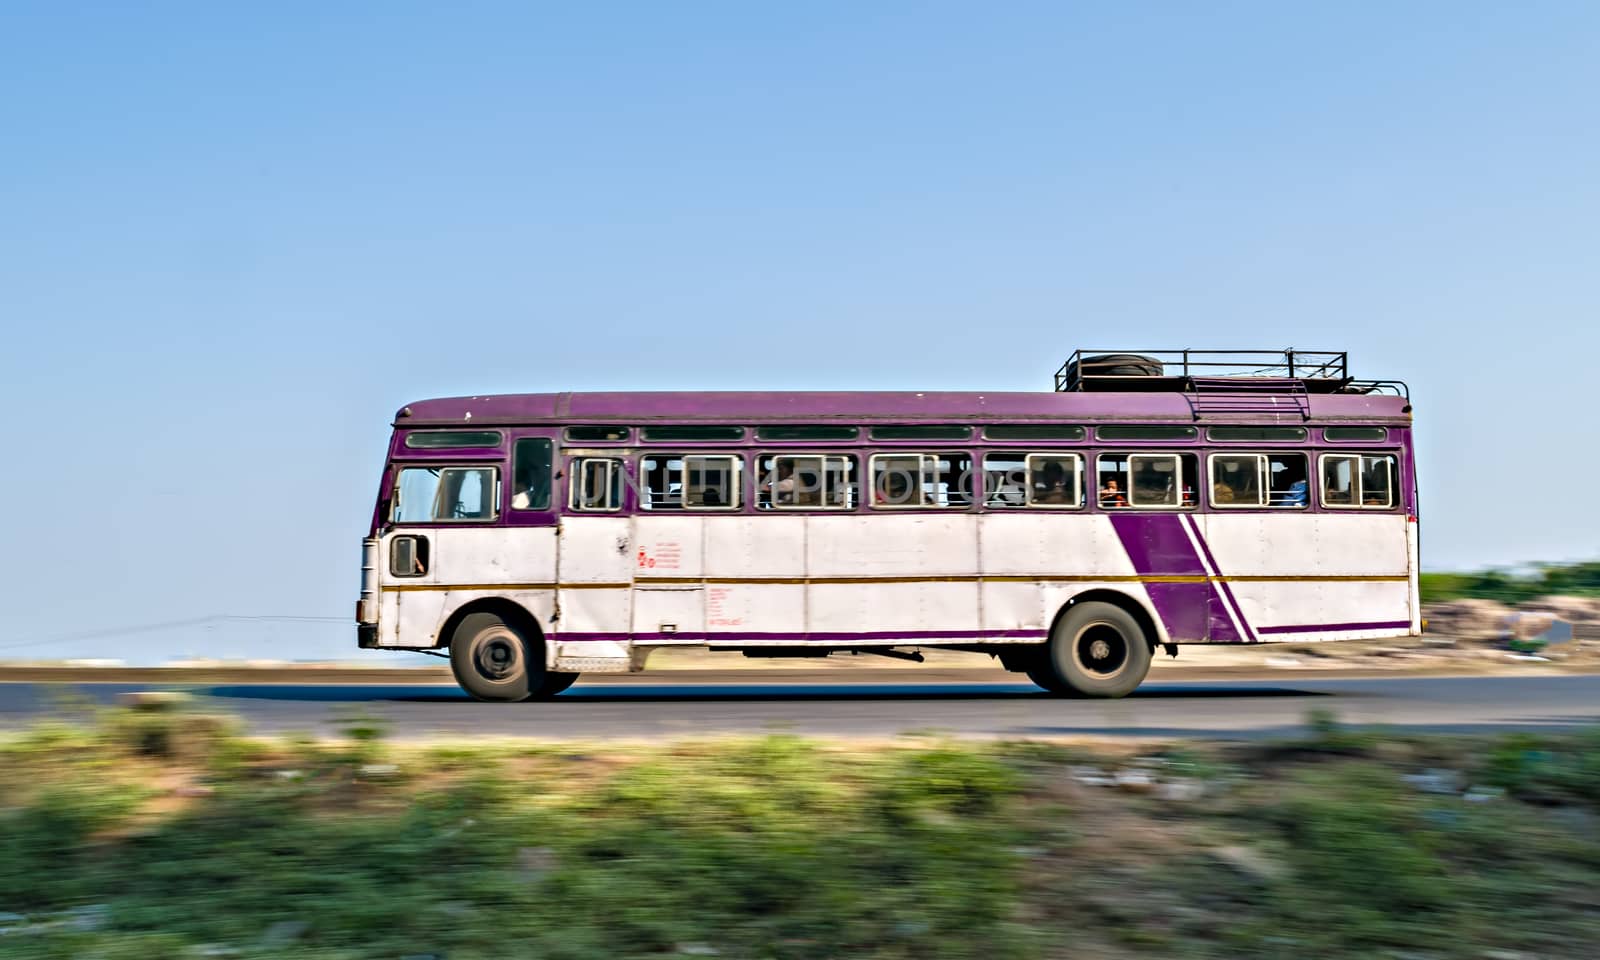 Isolated , slow shutter speed panning image of a speeding state transport bus on highway in Maharashtra, India.